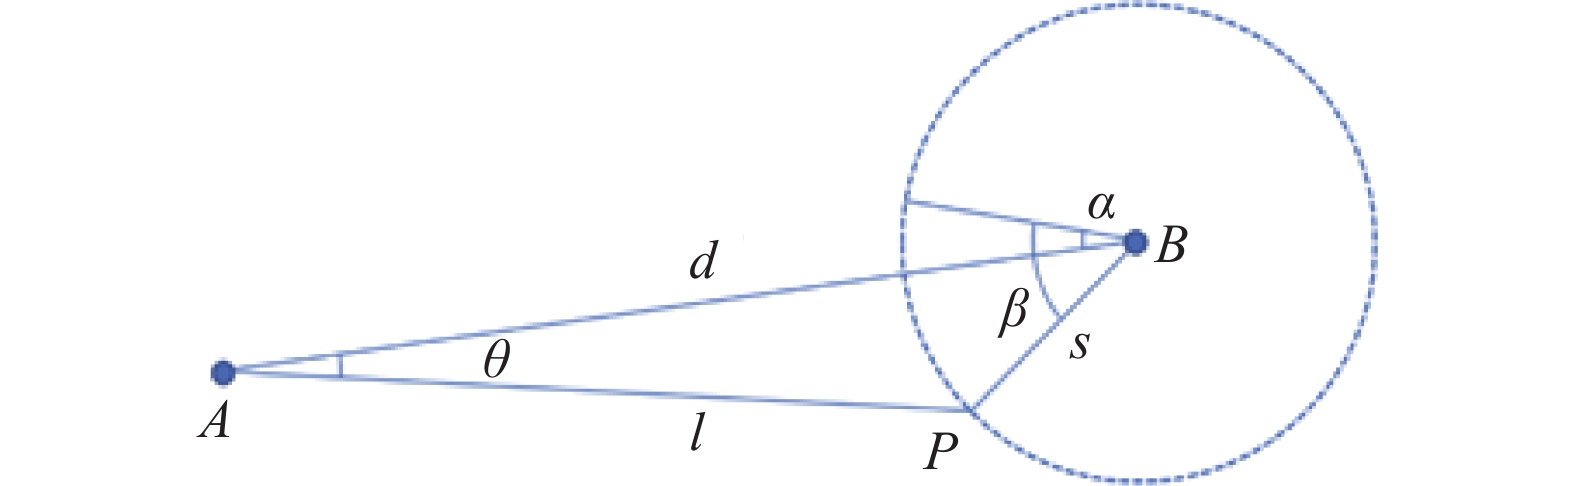 Diagram of the self-calibration in 2D space